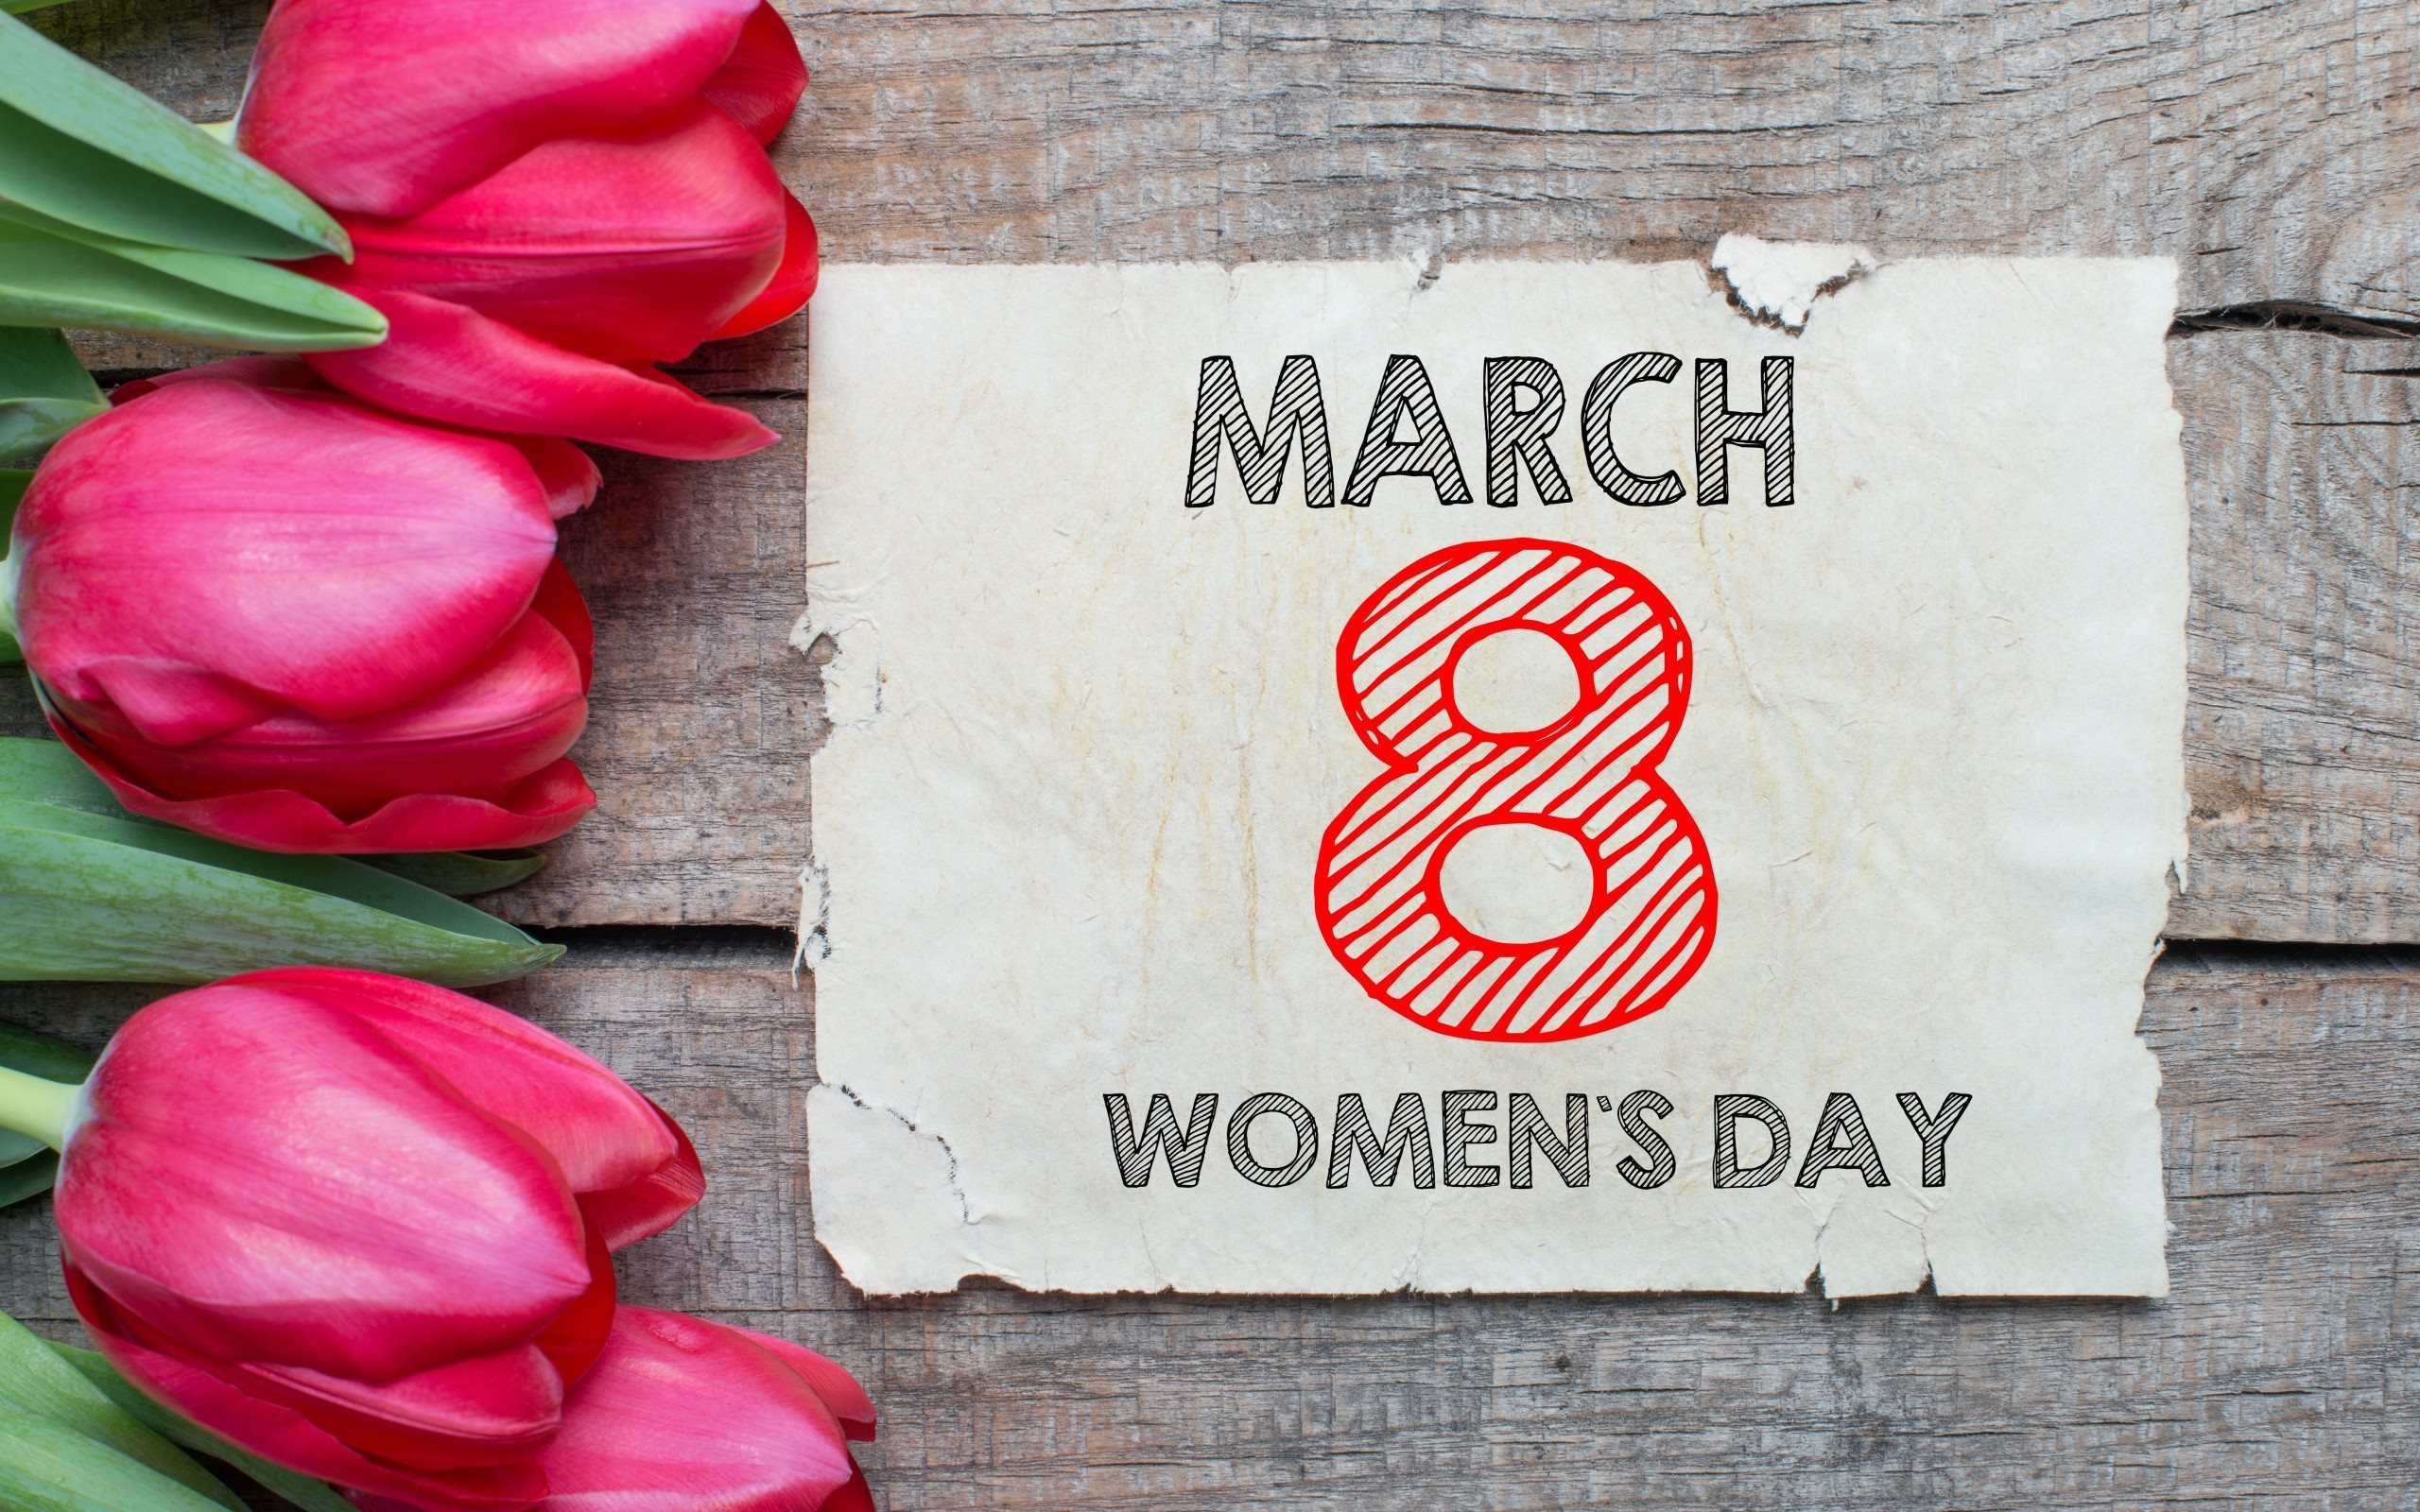 march-8-women's-day-tulips-pink-tulips-8-march.jpg